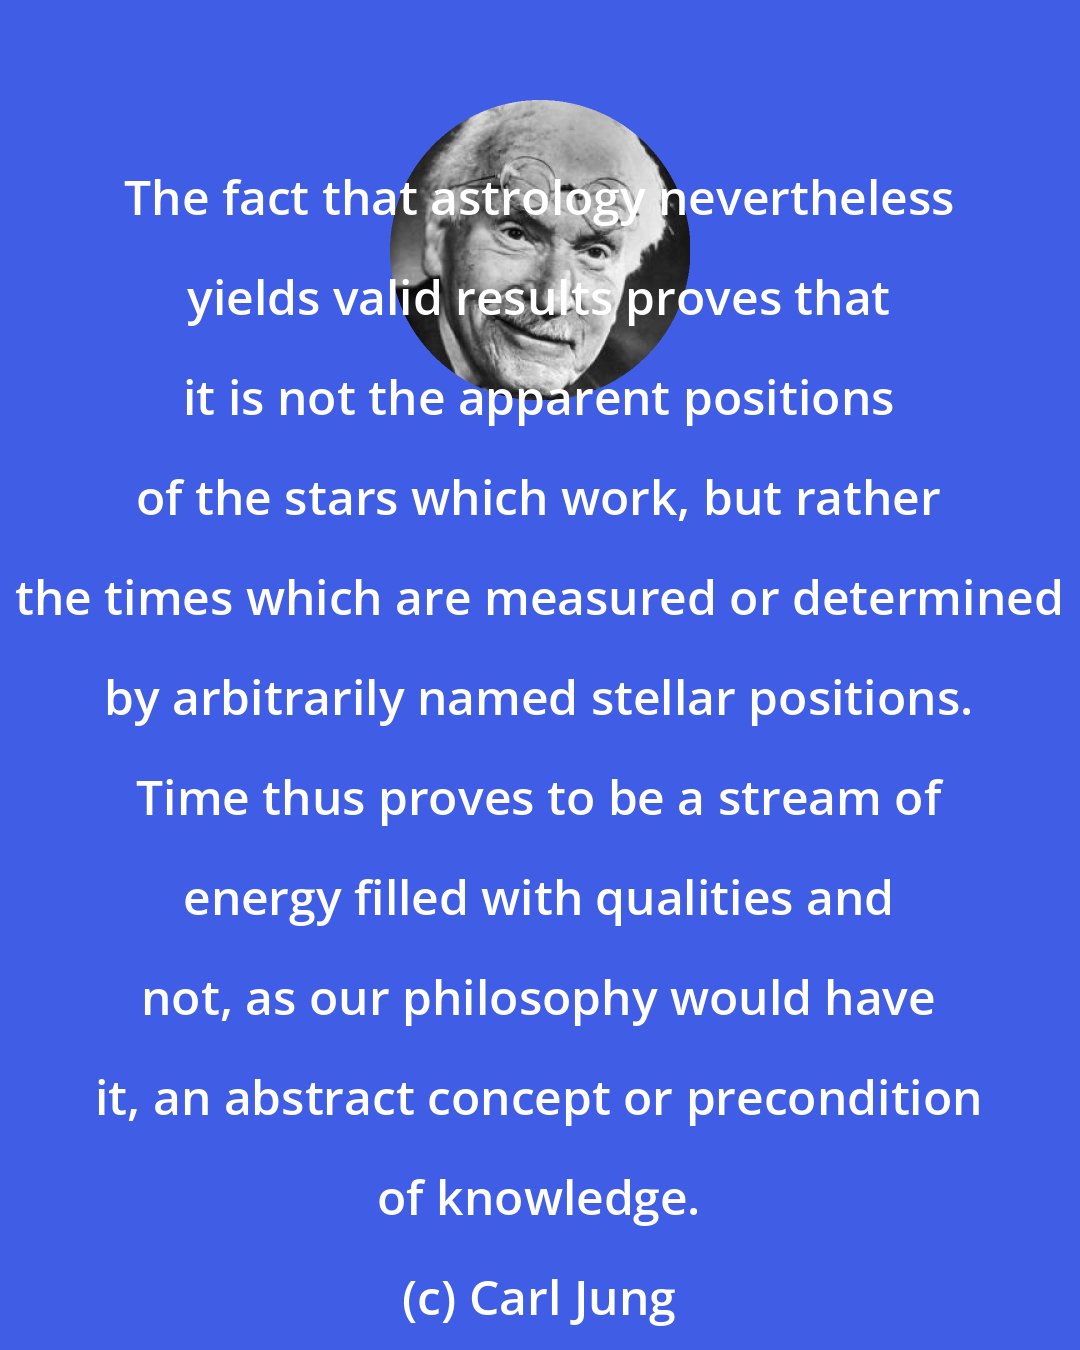 Carl Jung: The fact that astrology nevertheless yields valid results proves that it is not the apparent positions of the stars which work, but rather the times which are measured or determined by arbitrarily named stellar positions. Time thus proves to be a stream of energy filled with qualities and not, as our philosophy would have it, an abstract concept or precondition of knowledge.